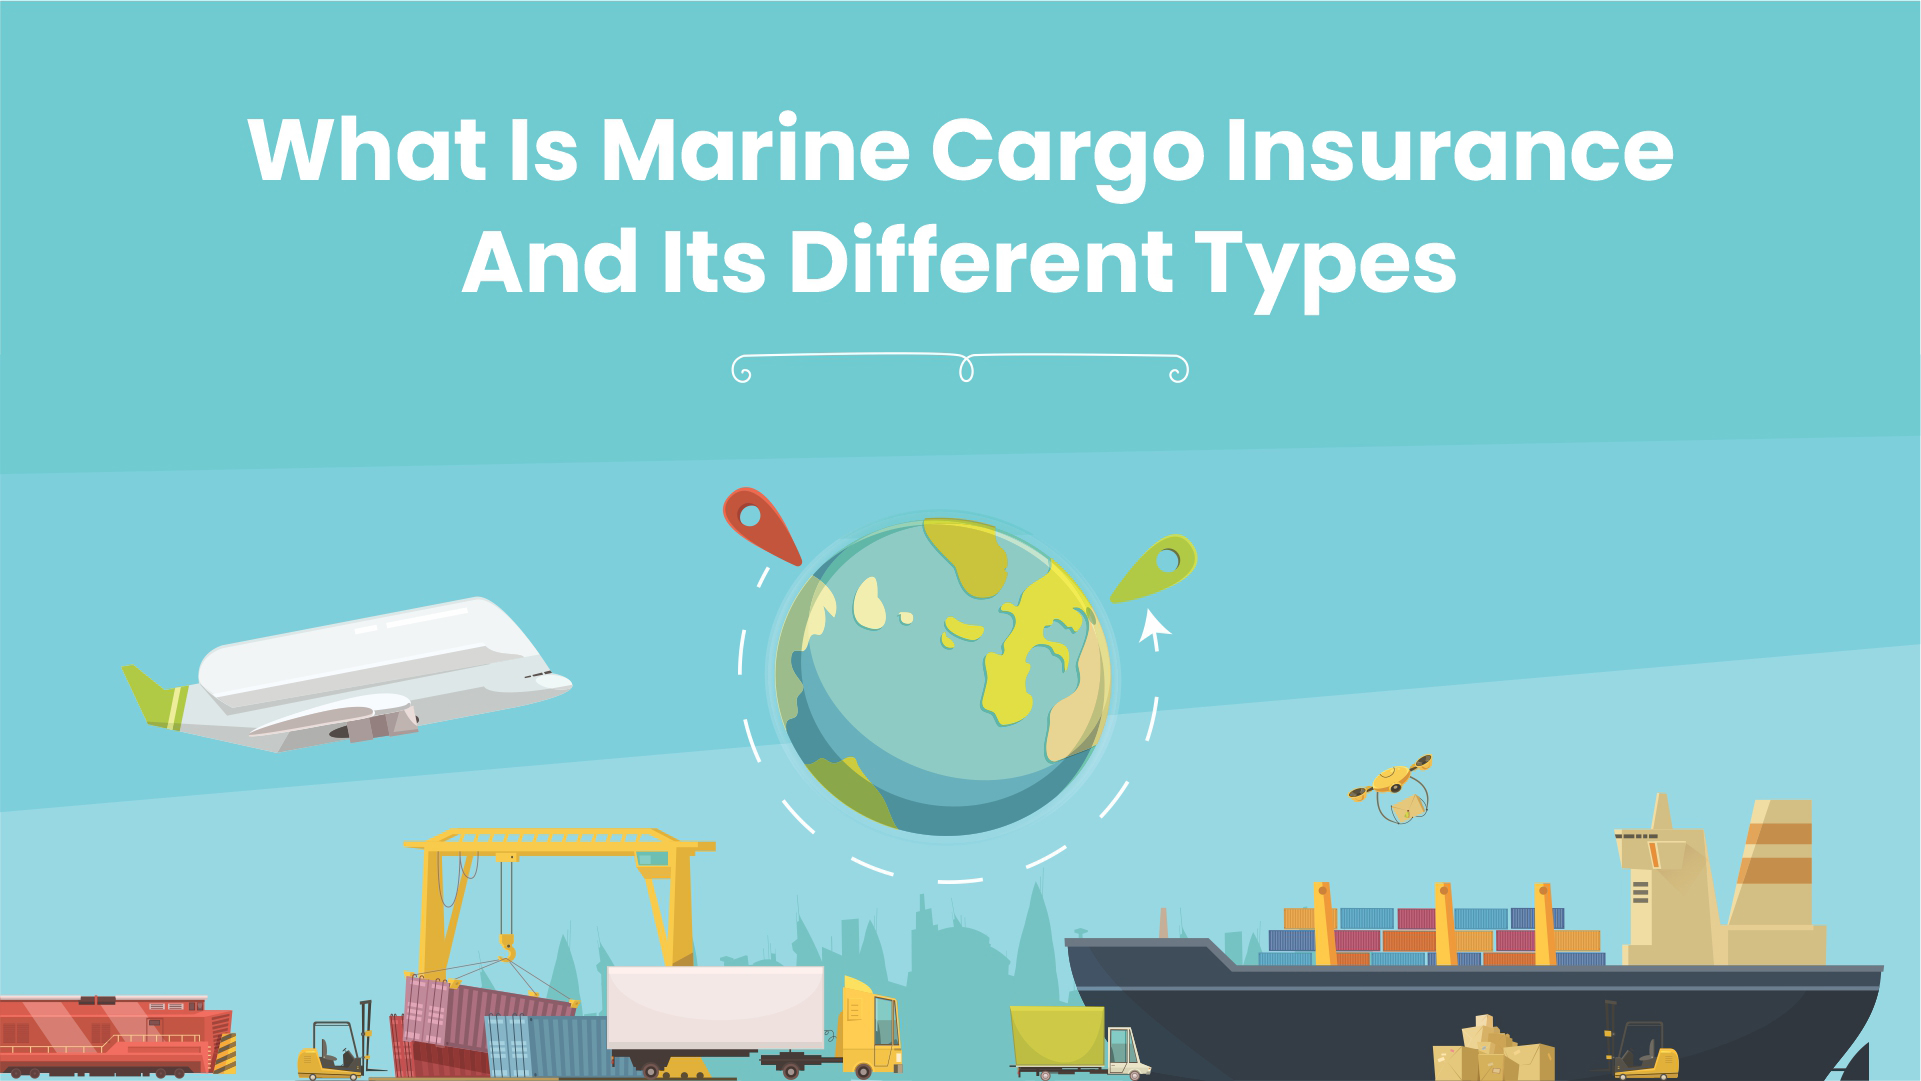 What is Marine Cargo Insurance and its Different Types?